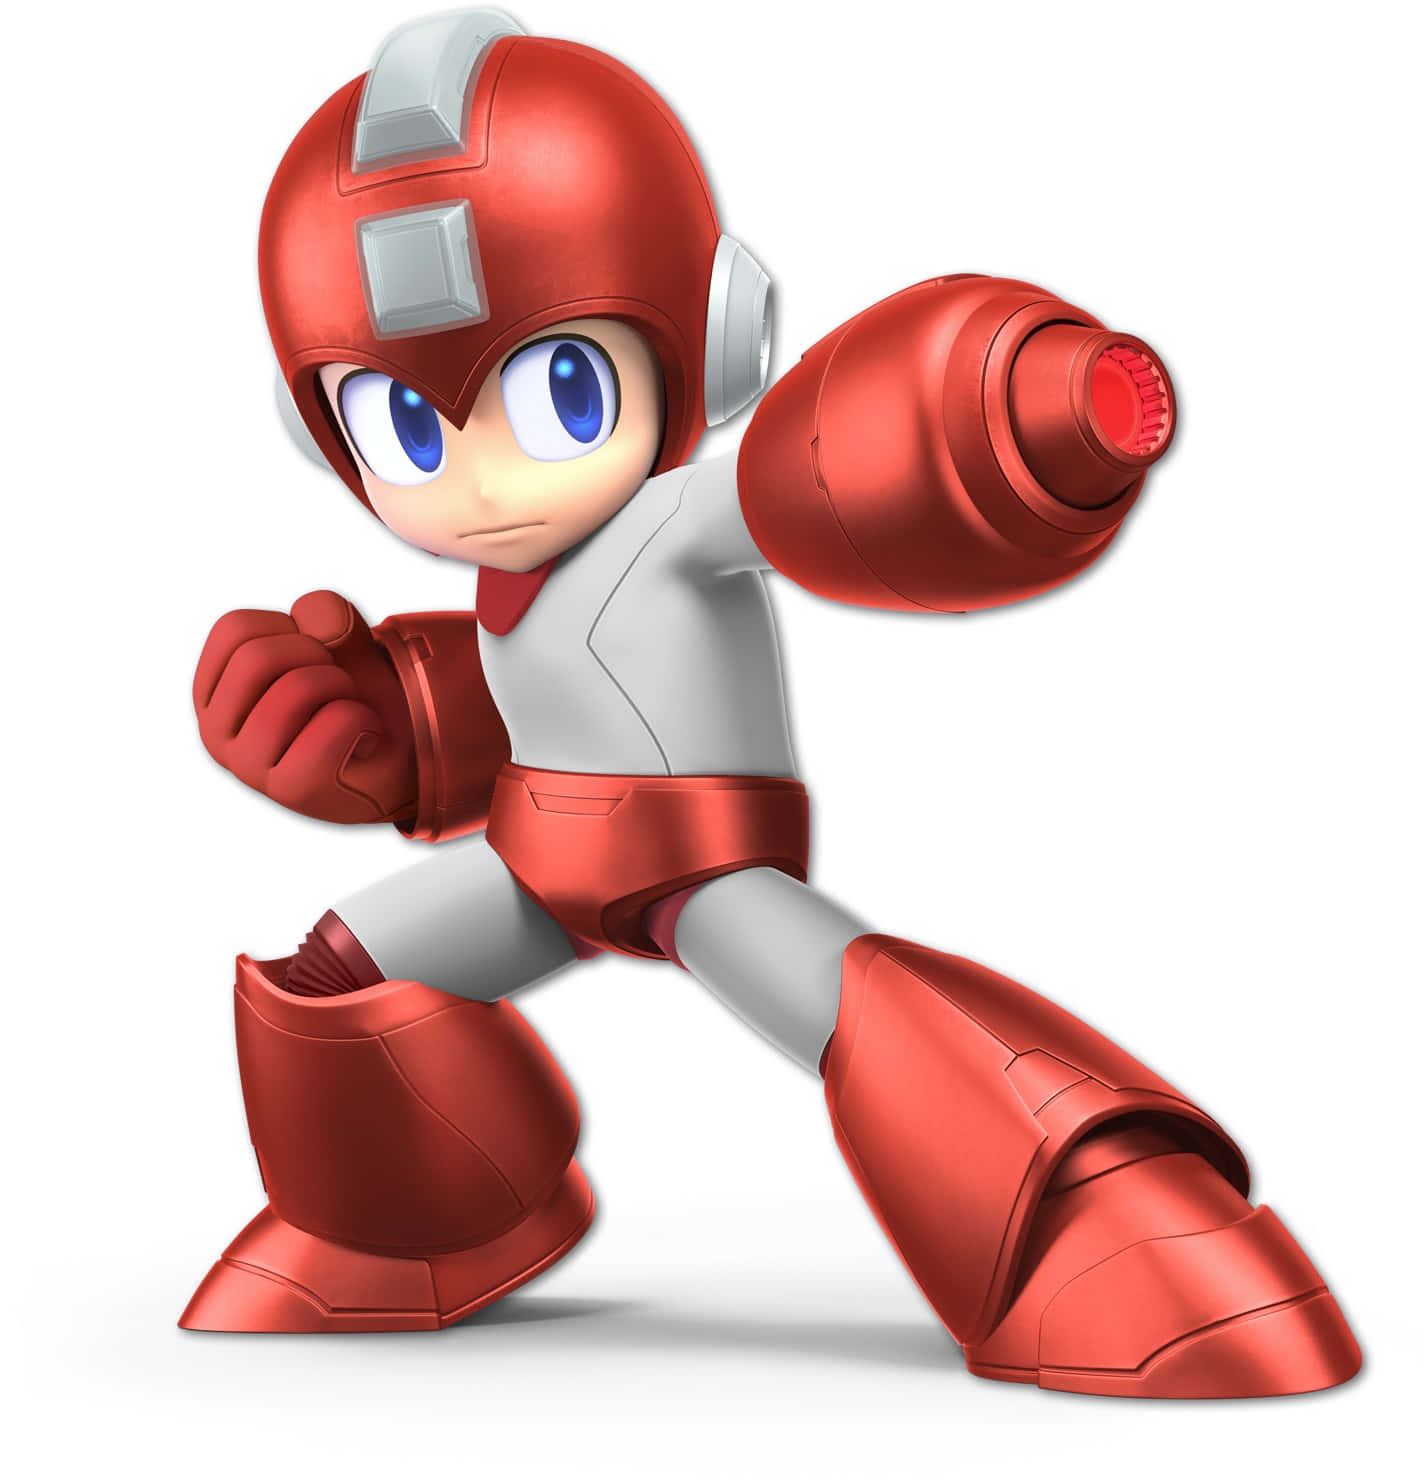 Megaman standing strong in an epic action pose